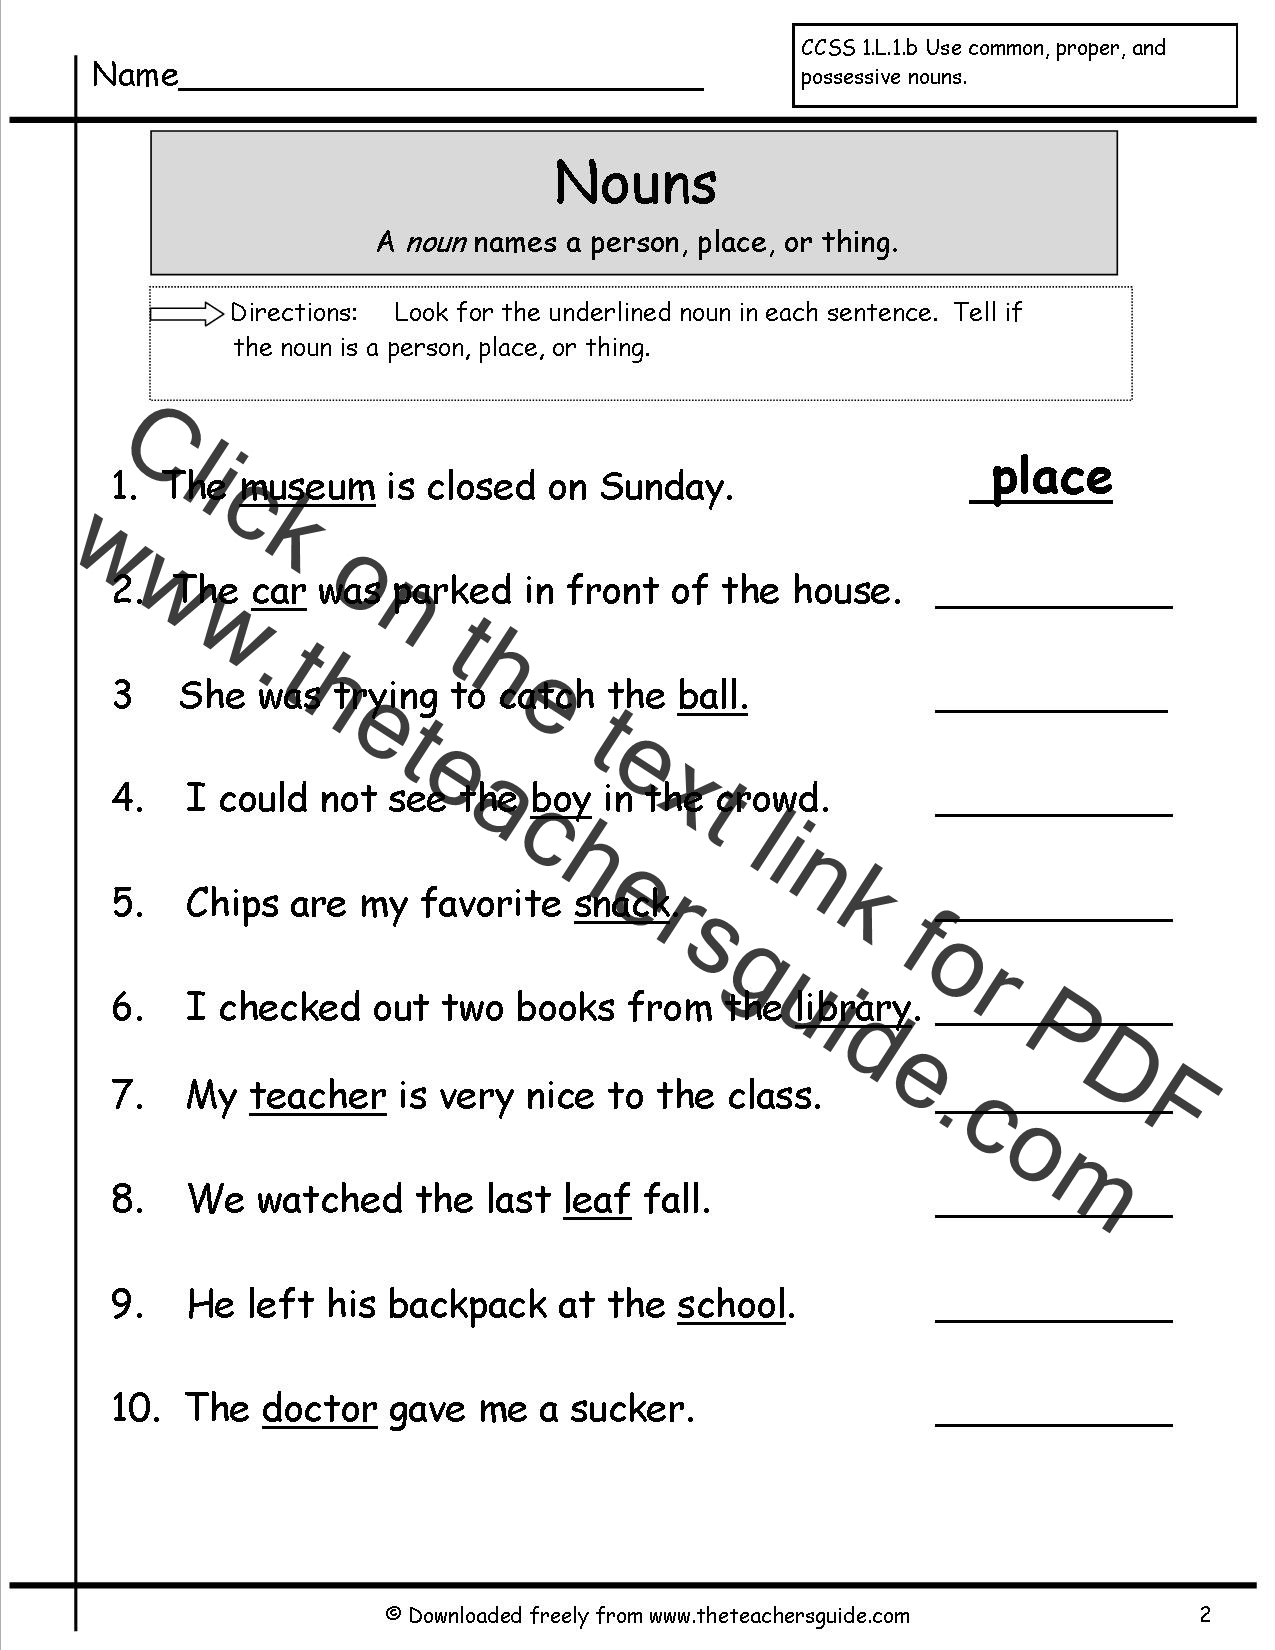 person-place-or-thing-worksheet-have-fun-teaching